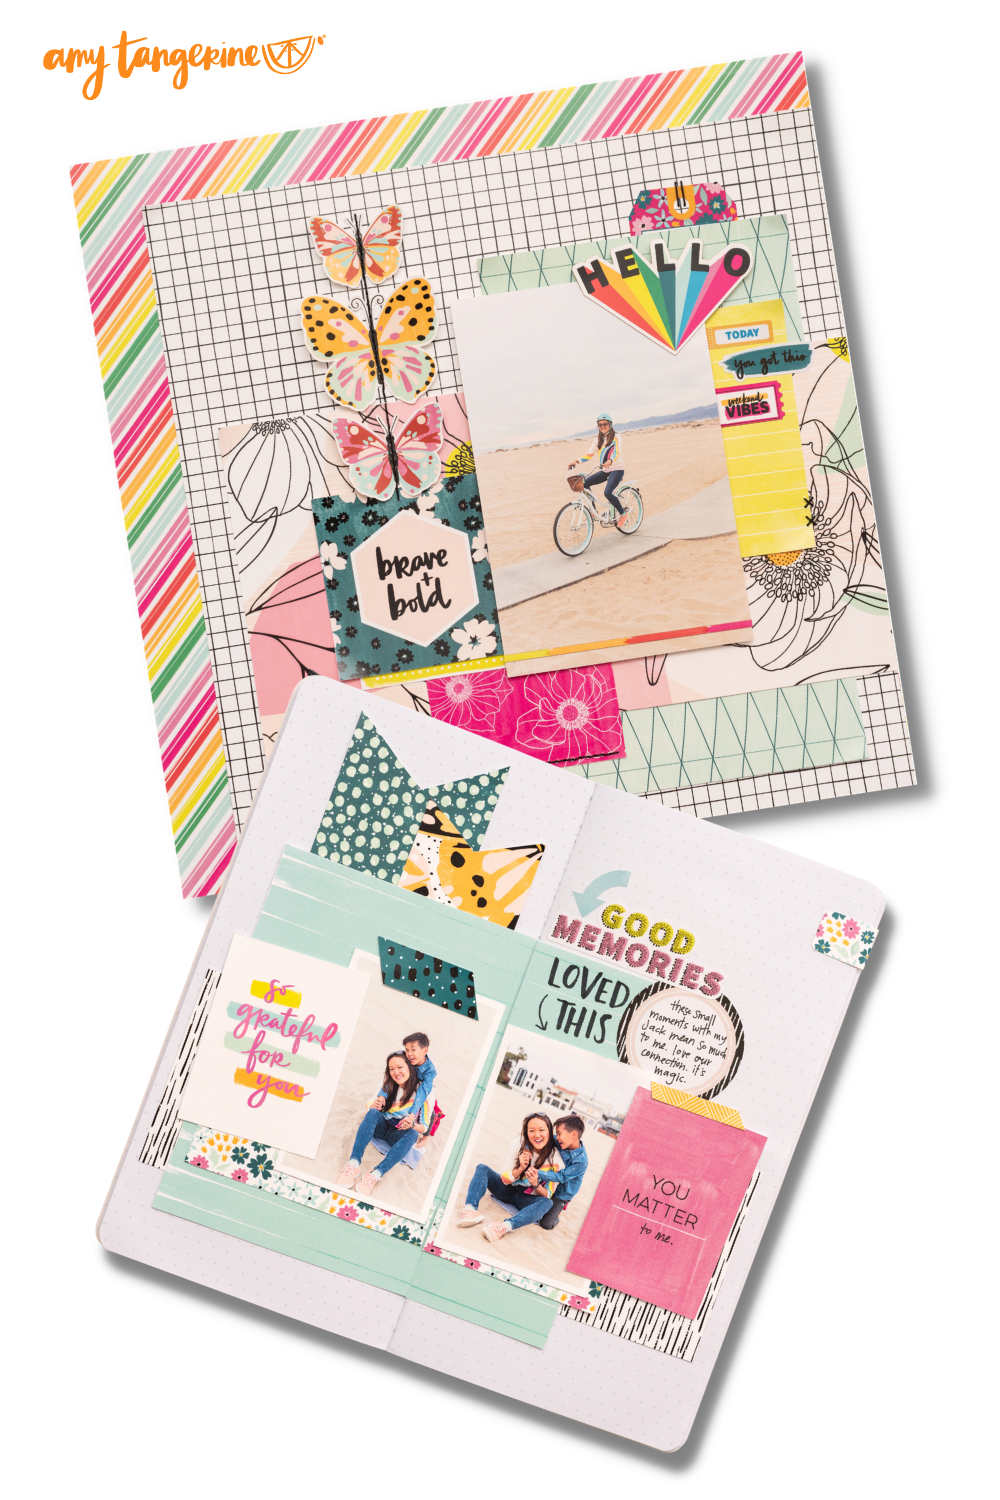 Crafting the Keepsake Kitchen Diary with Amy Tangerine Scrapbook Supplies